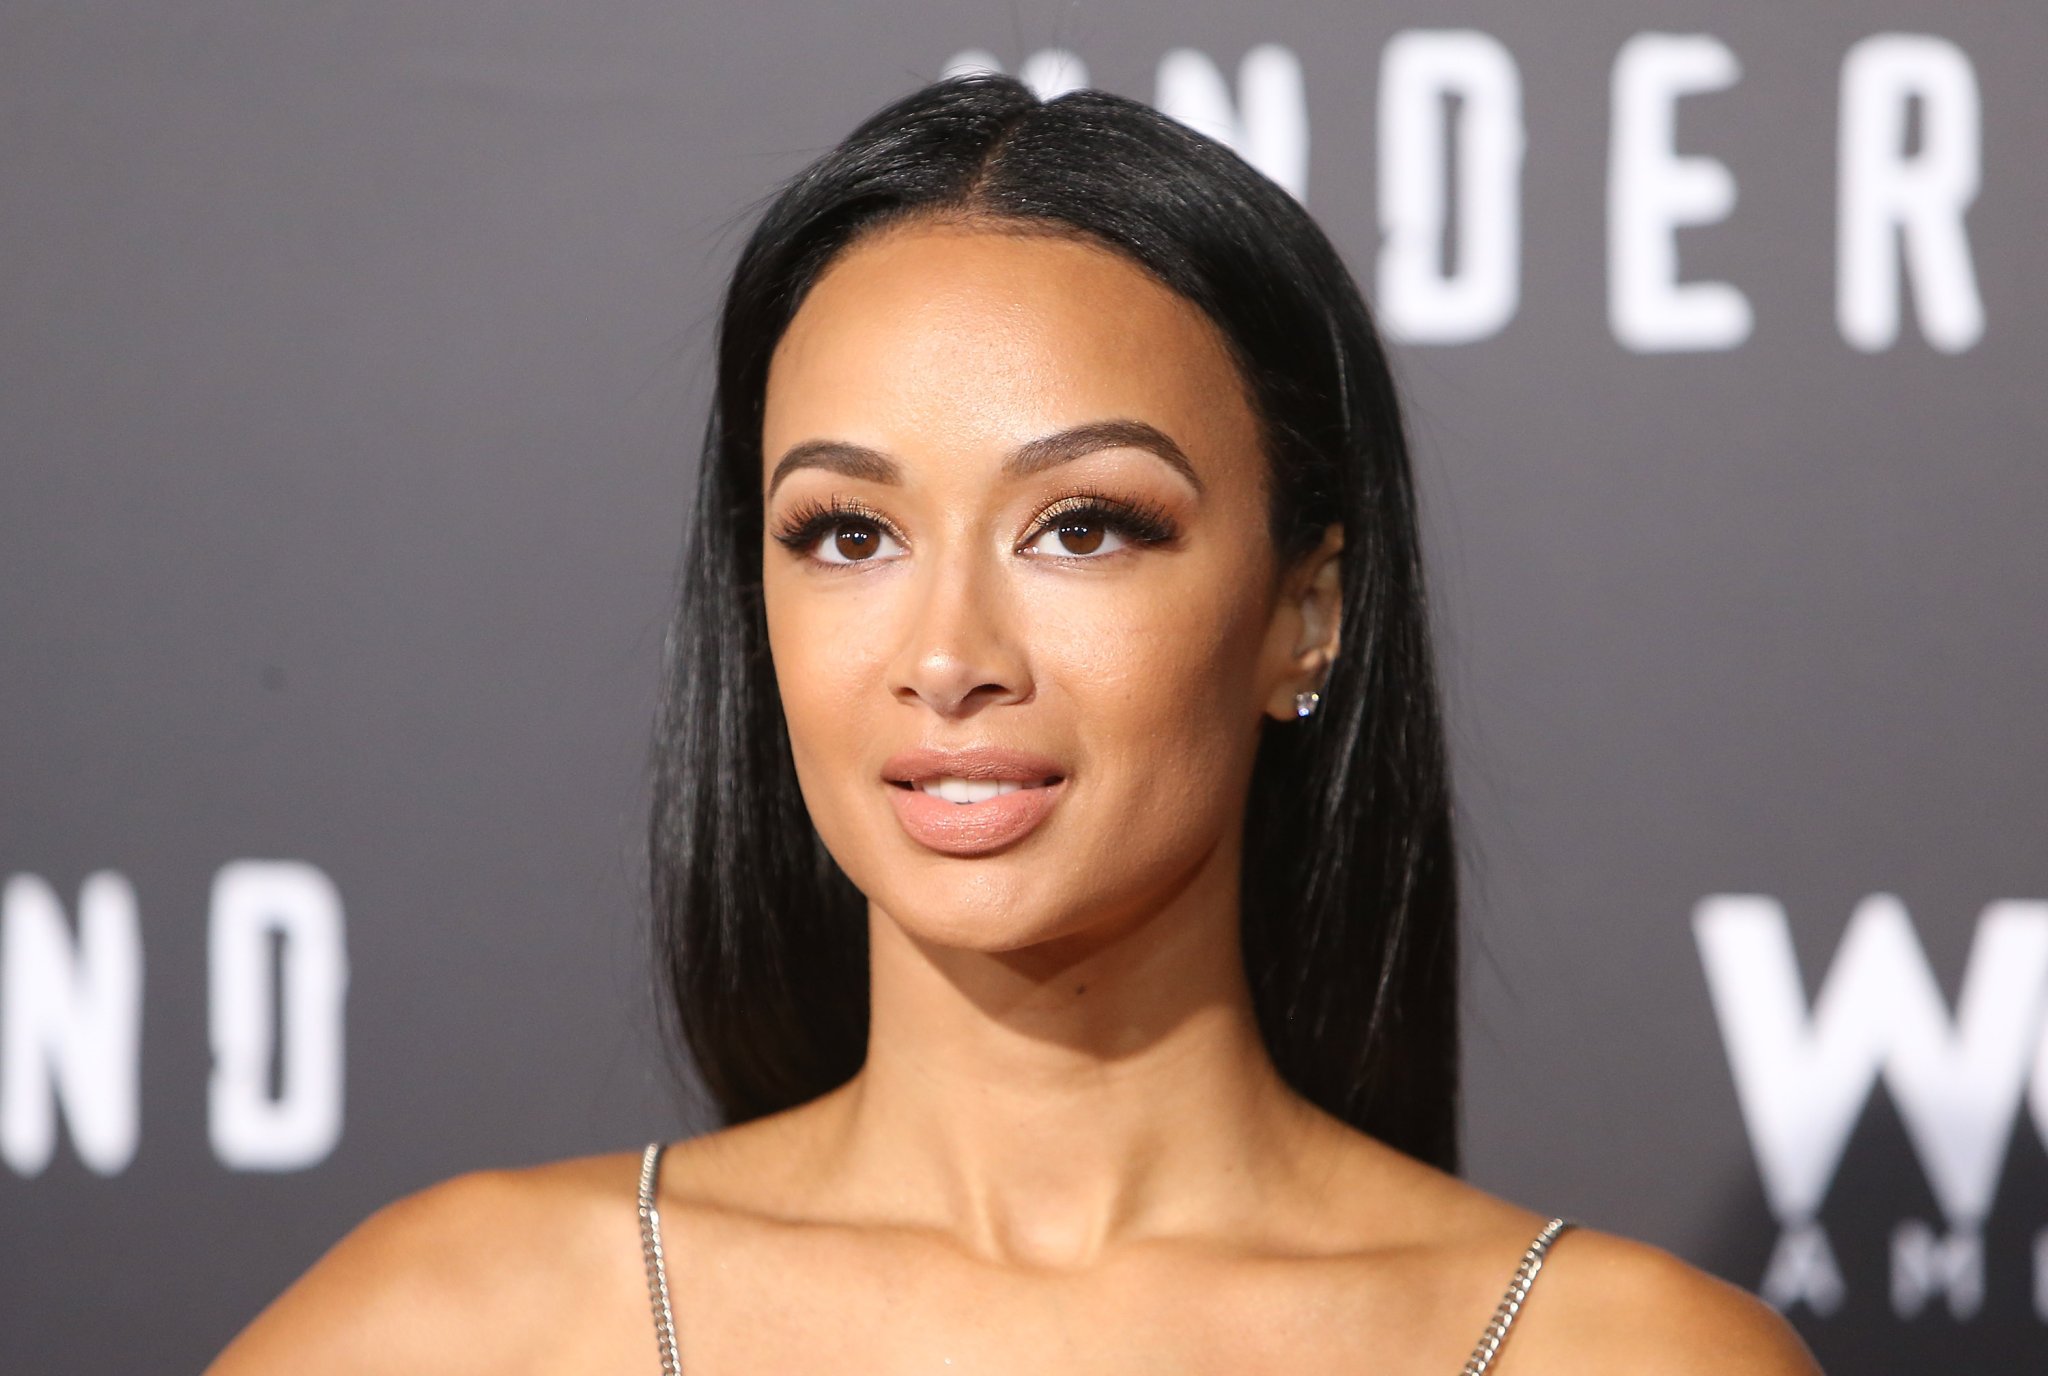 Draya Michele Sets The Internet Ablaze In A ‘Barely There’ Chain Skirt